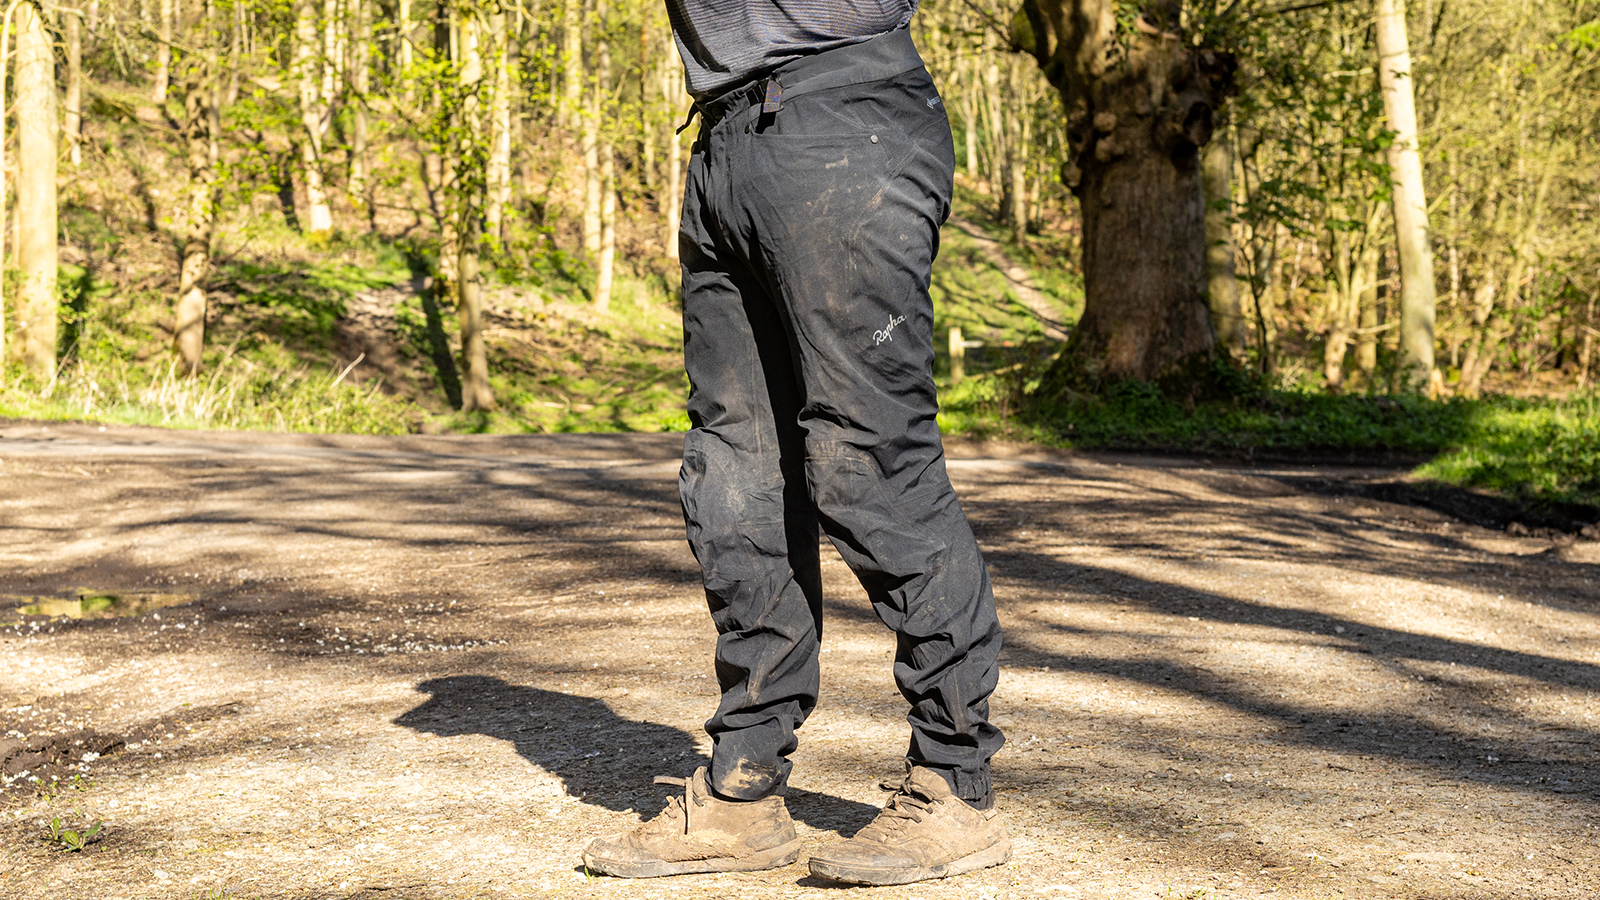 Rapha Trail Gore-Tex Pants review – outstanding, premium-priced waterproof trouser